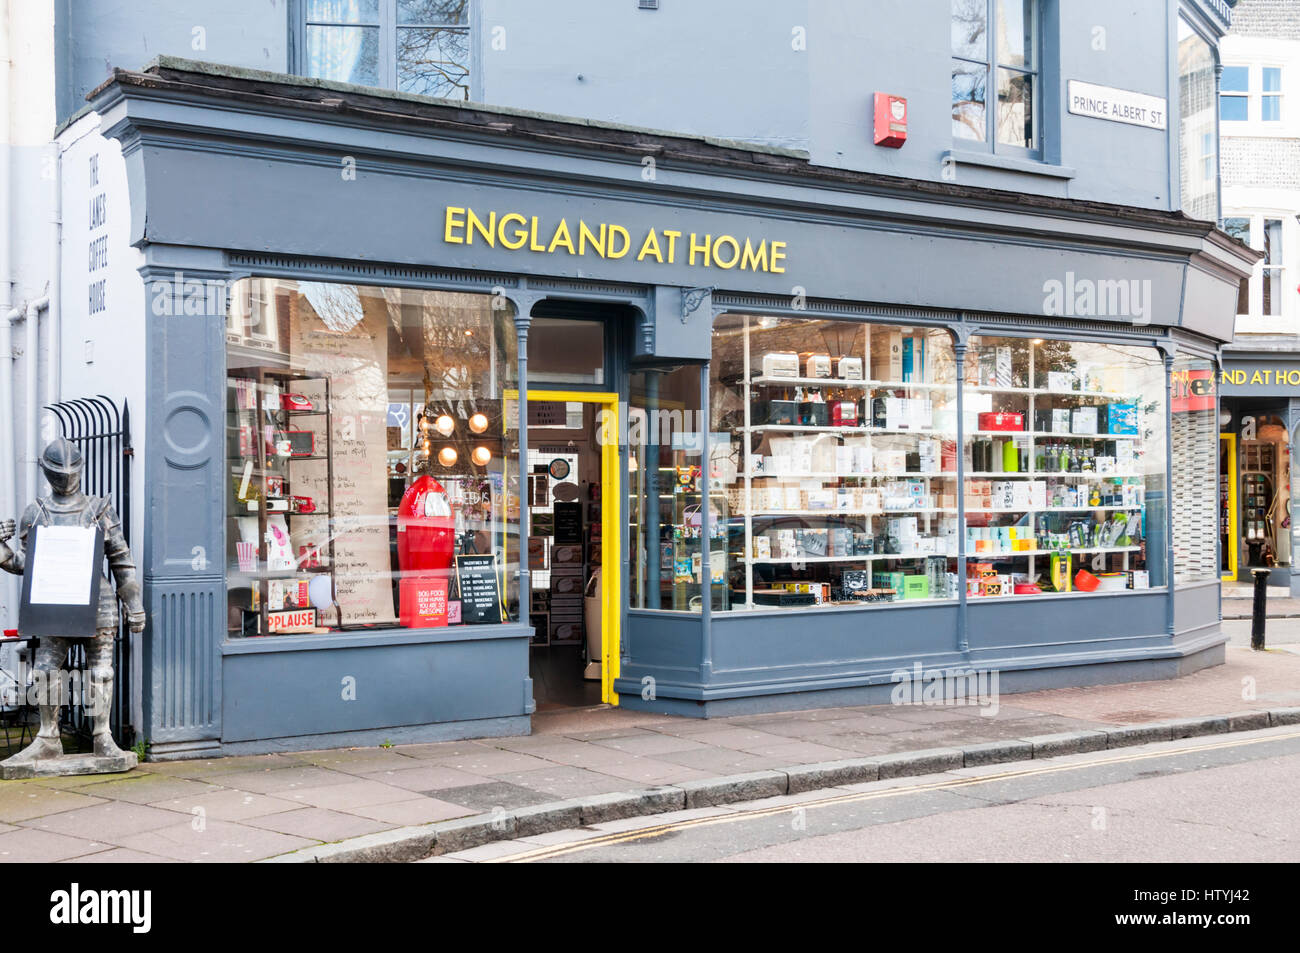 England at Home shop in Brighton Stock 